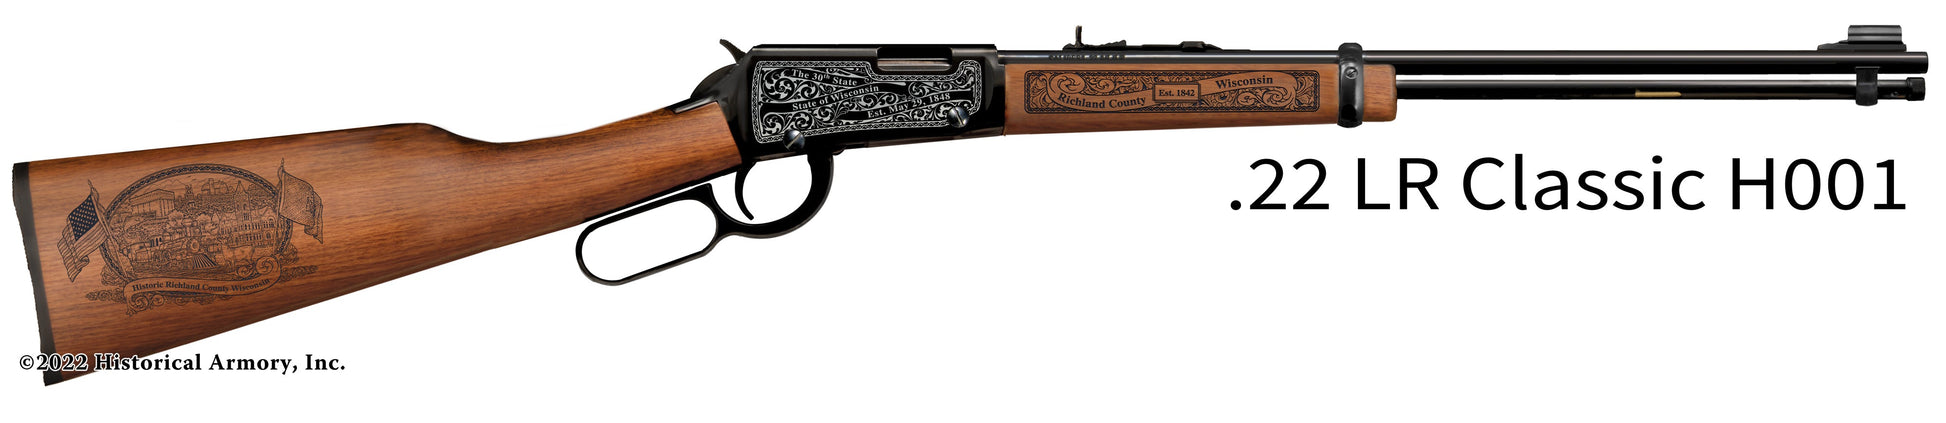 Richland County Wisconsin Engraved Henry H001 Rifle